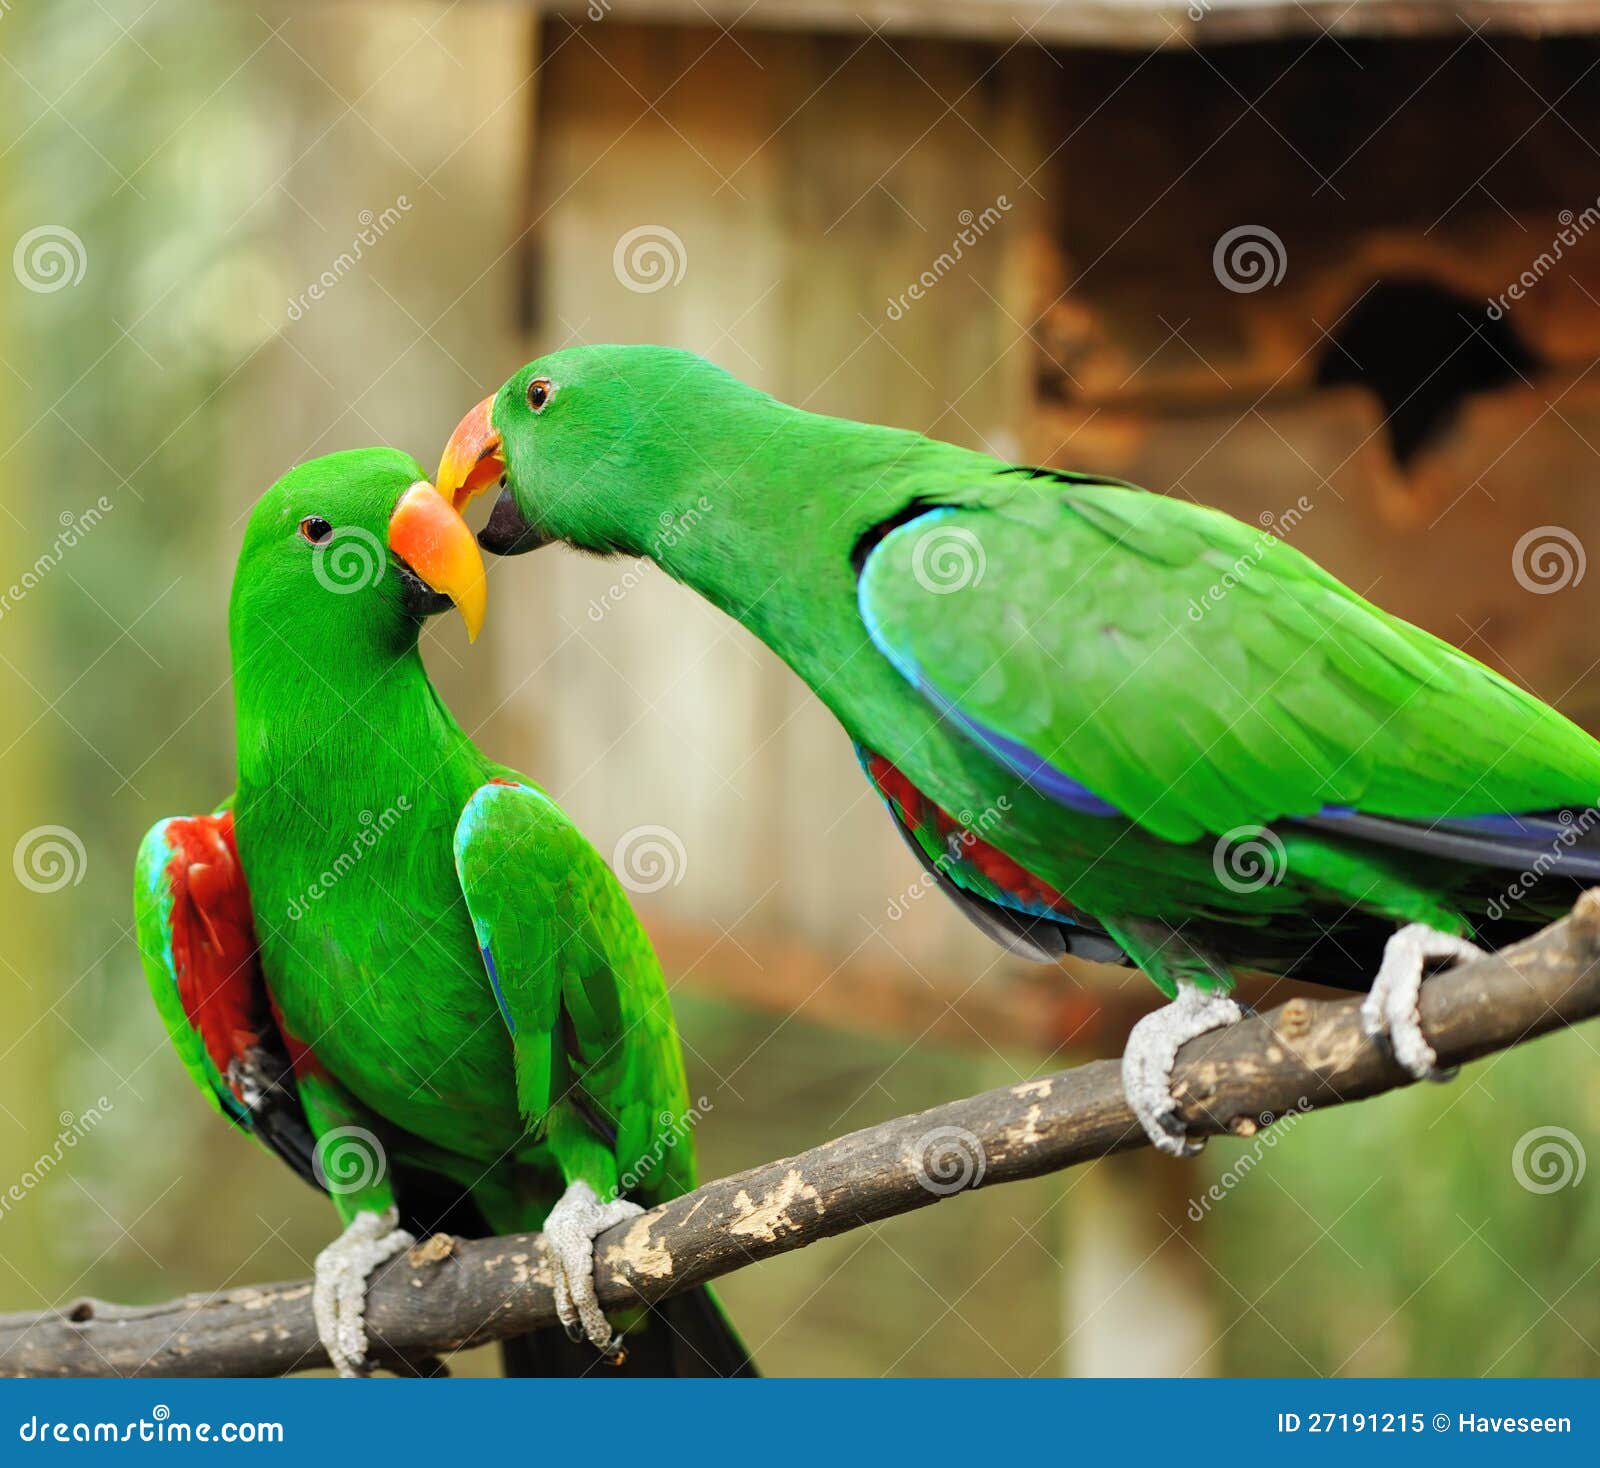 4,144 Couple Green Parrot Stock Photos - Free & Royalty-Free Stock Photos  from Dreamstime